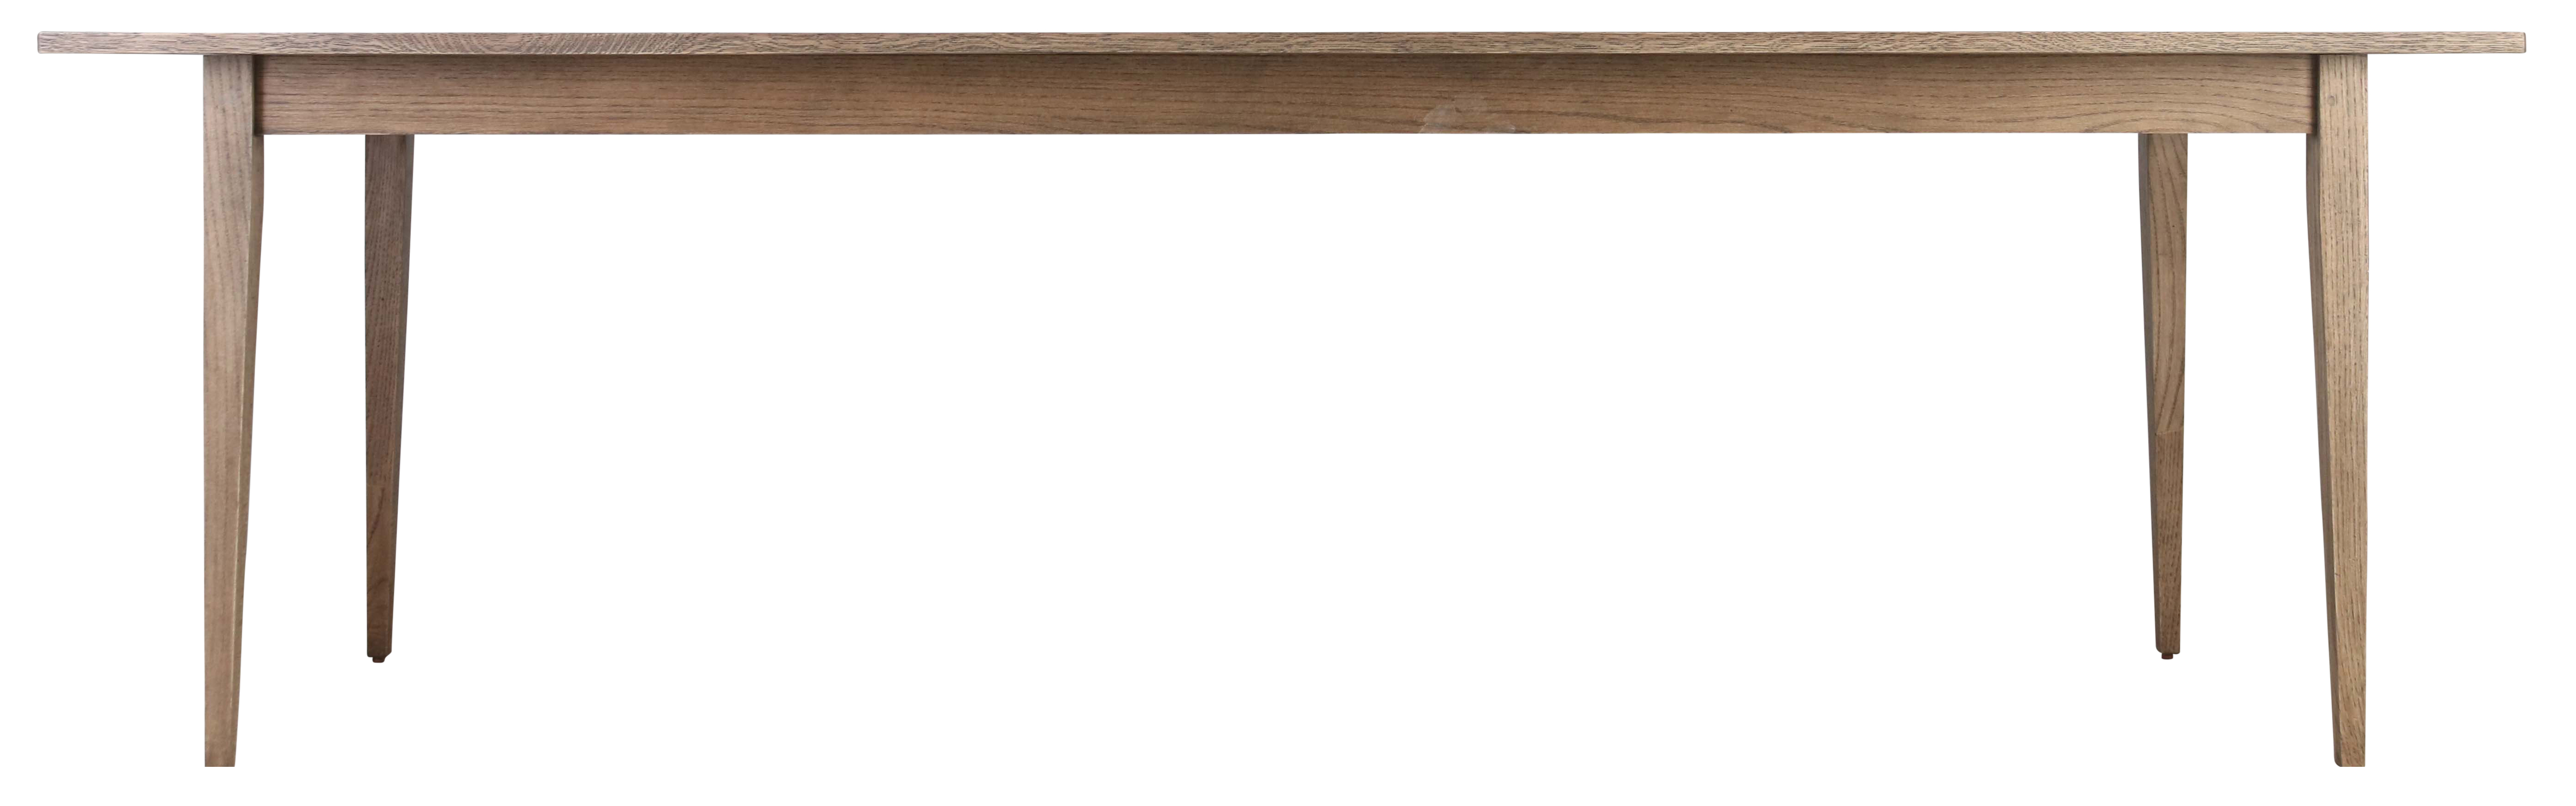 Block & Chisel rectangular solid antique weathered oak dining table